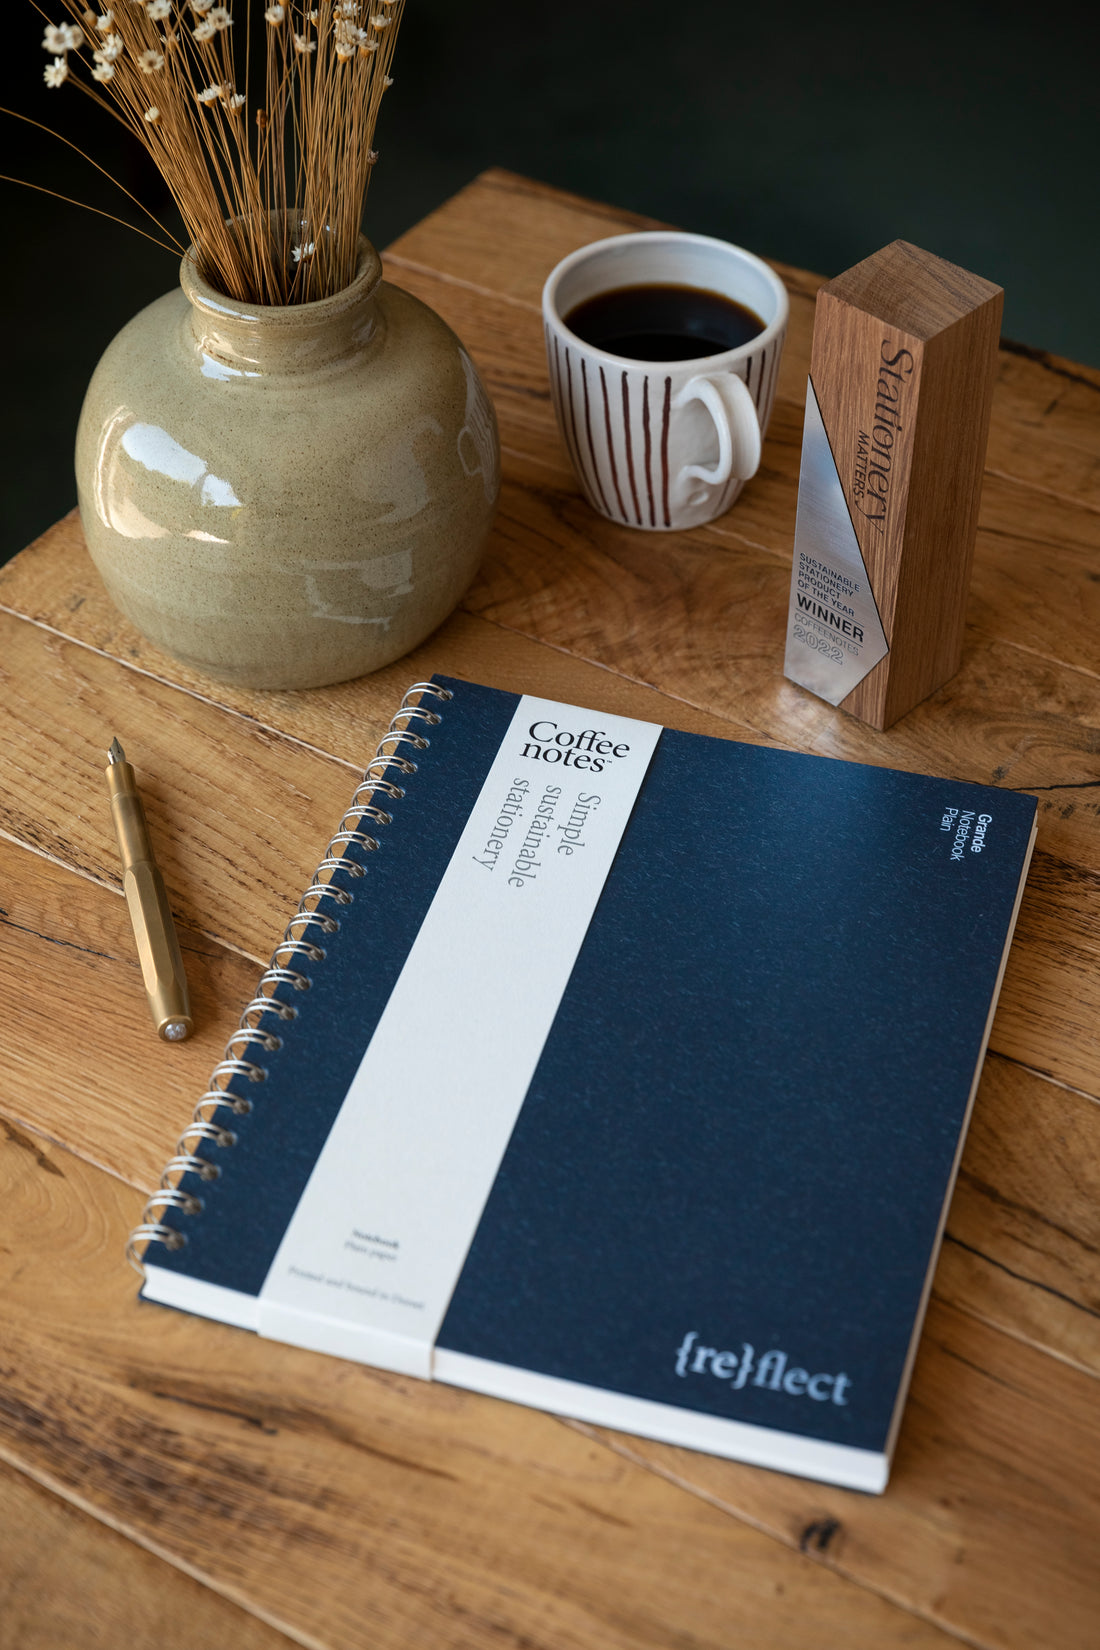 Coffeenotes wins Sustainable Stationery Product of the Year 2022